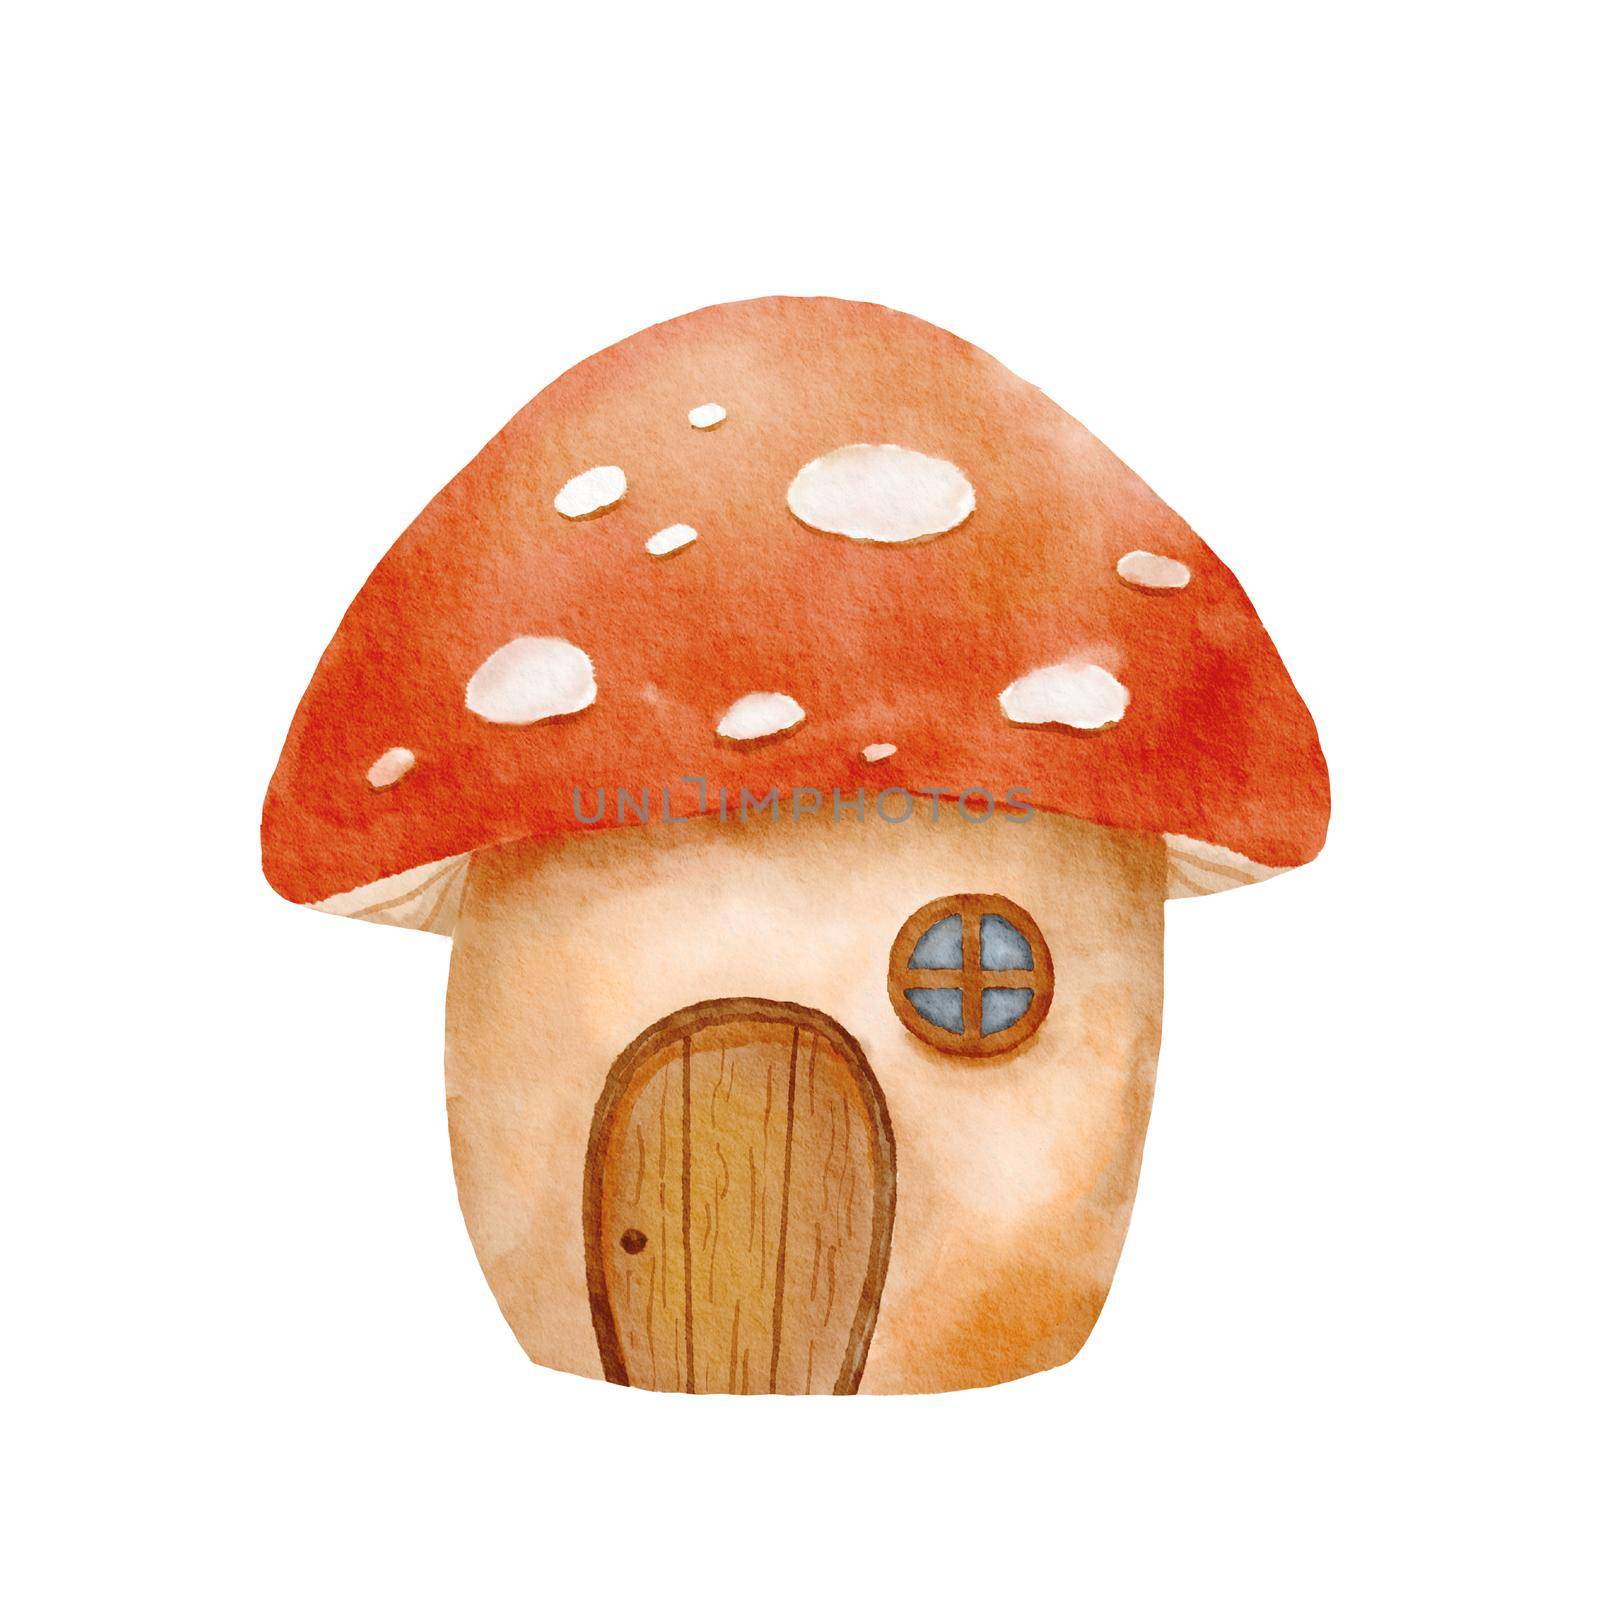 Watercolor illustration with Fly agaric mushroom. Forest cute mushroom house isolated on white background by ElenaPlatova